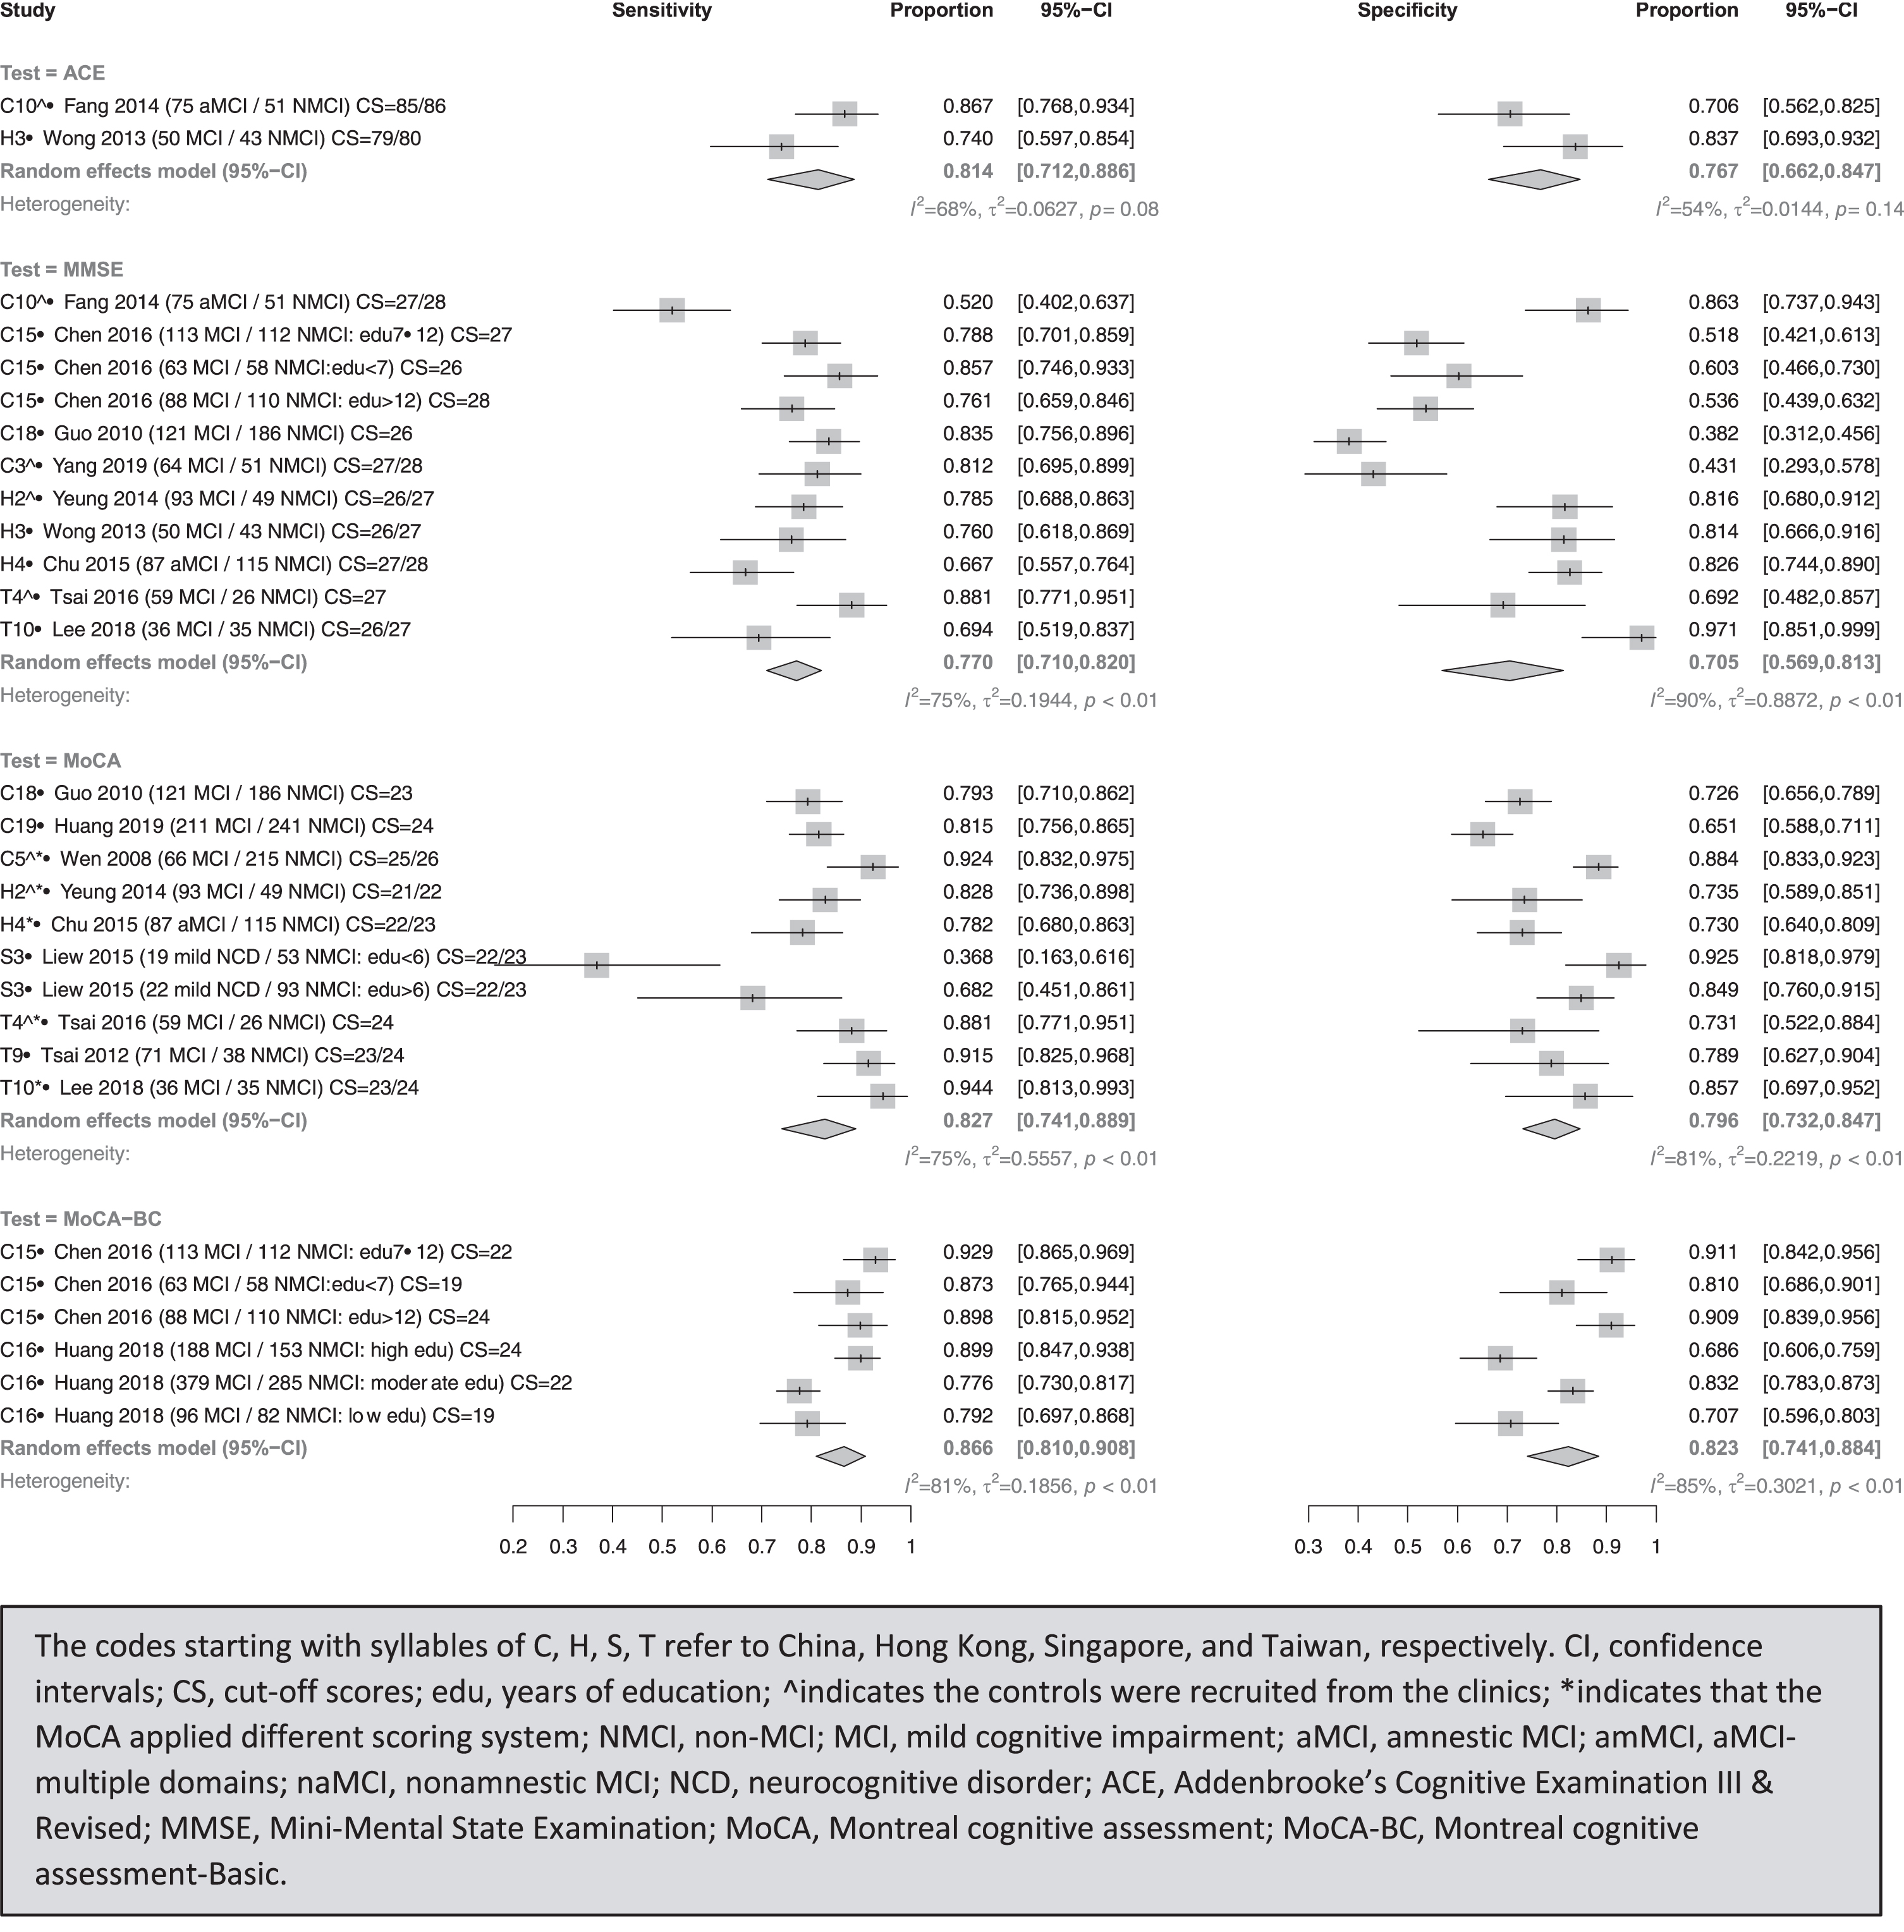 Meta-analyses for diagnostic test accuracy on diagnosing MCI.